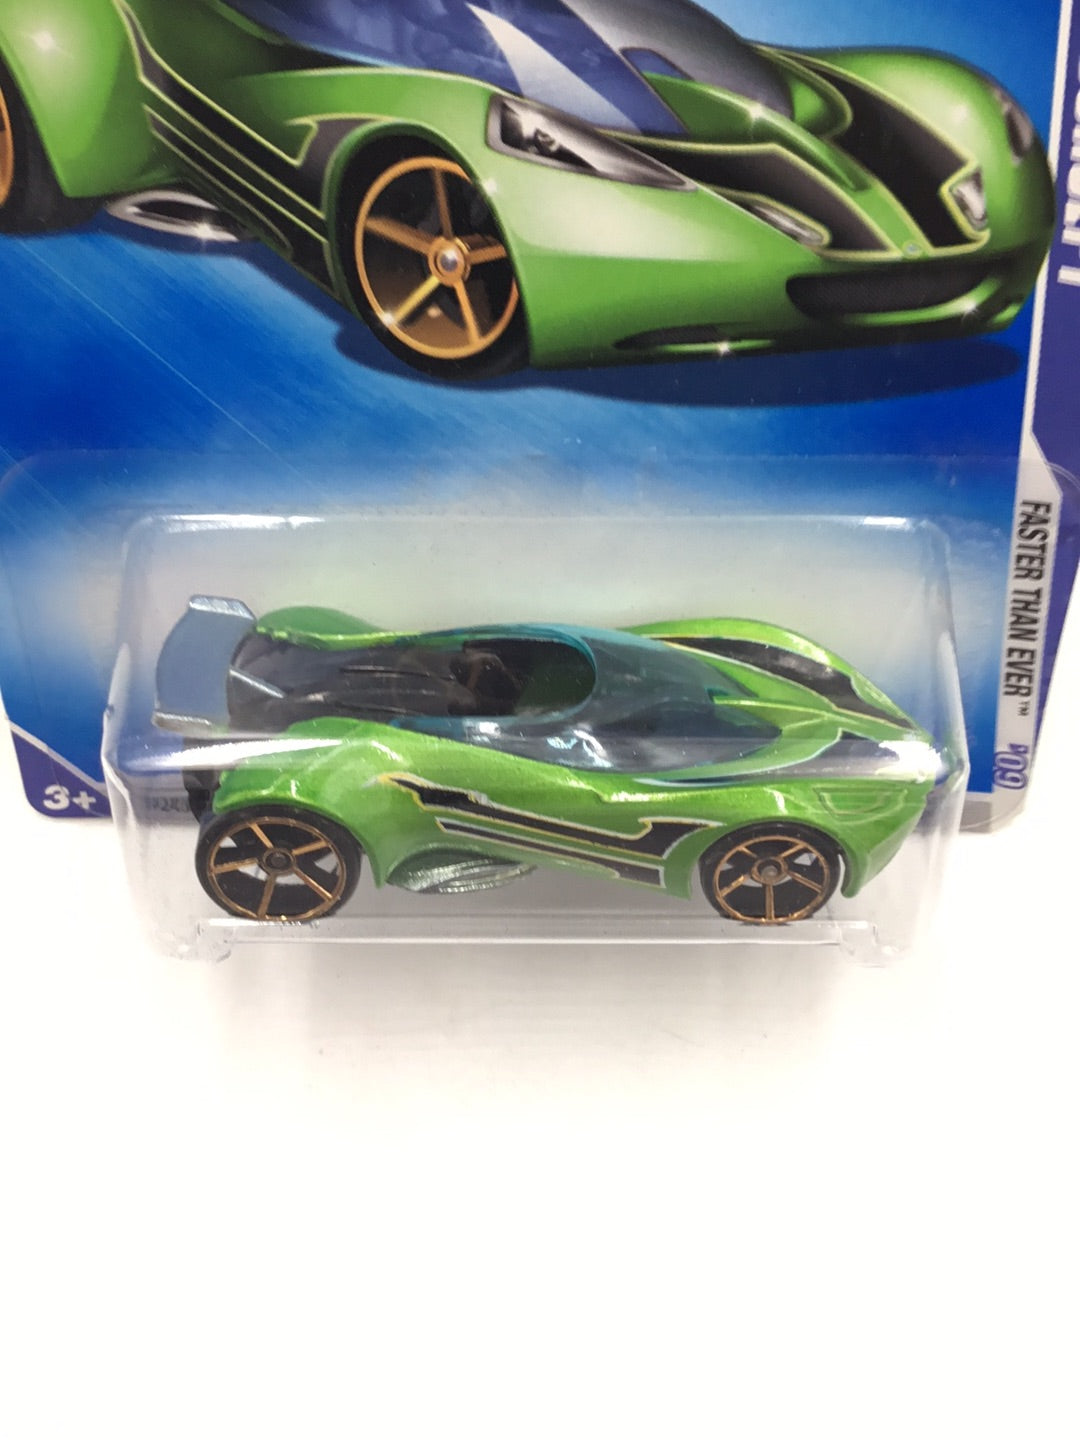 2009 Hot wheels #134 Lotus Concept fte faster than ever SS7